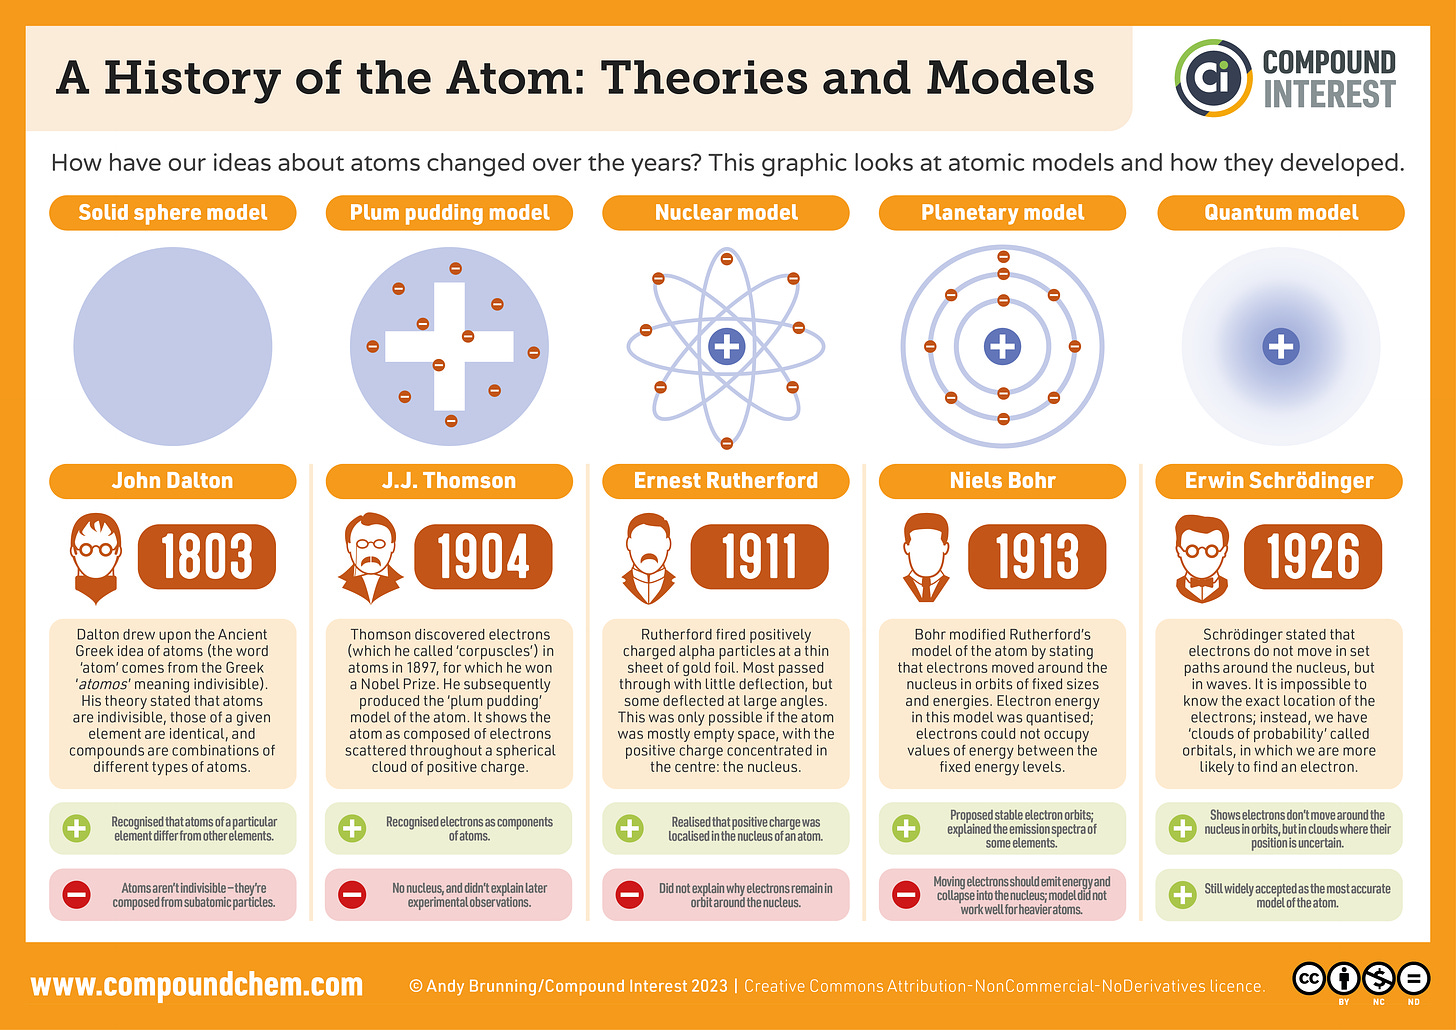 An infographic history of the atom. Dalton identified that atoms of a particular element differ from those of other elements. Thomson discovered the electron and described the 'plum pudding' model of the atom: electrons scattered throughout a cloud of positive charge. Rutherford identified that the positive charge was concentrated in the nucleus of the atom. Bohr modified Rutherford's model by stating that elelctrons move in orbits of fixed sizes and energies. Schrödinger stated that electrons do not move in paths around the nucleus but in waves.